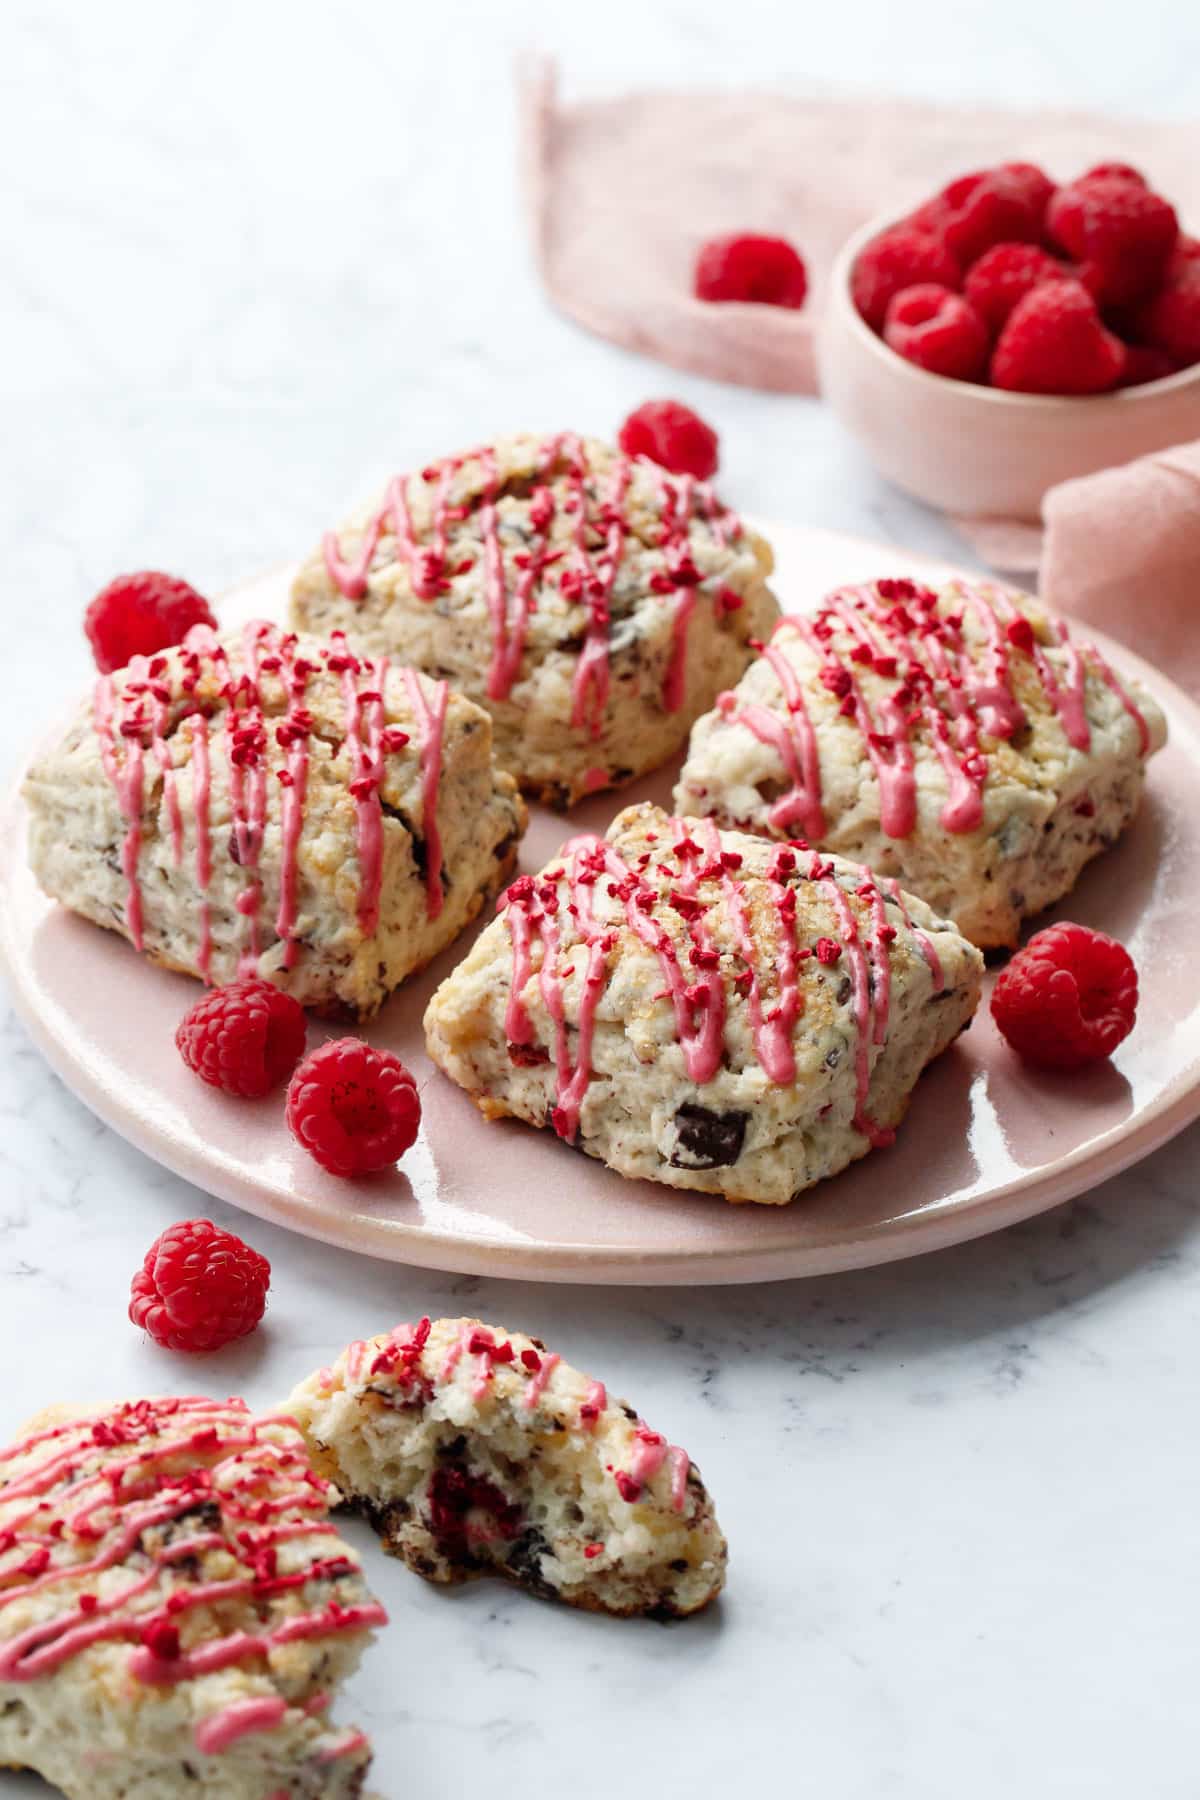 Dark Chocolate Raspberry Cream Scones on a pink plate, with one broken scone in the foreground and a bowl of fresh raspberries in the background.